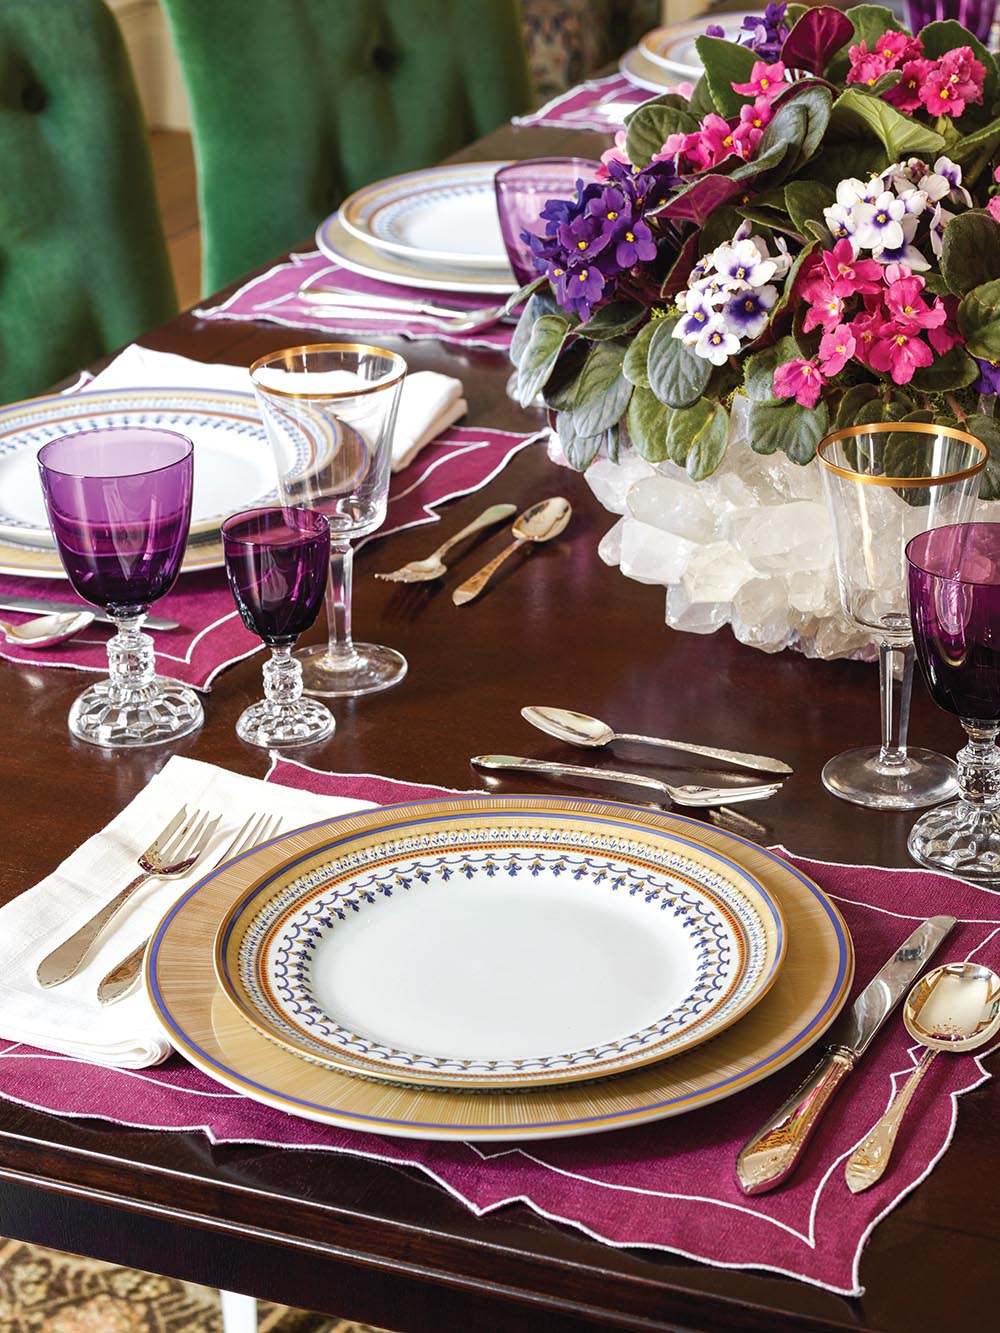 Gold-rimmed china and purple glassware on mahogany table.